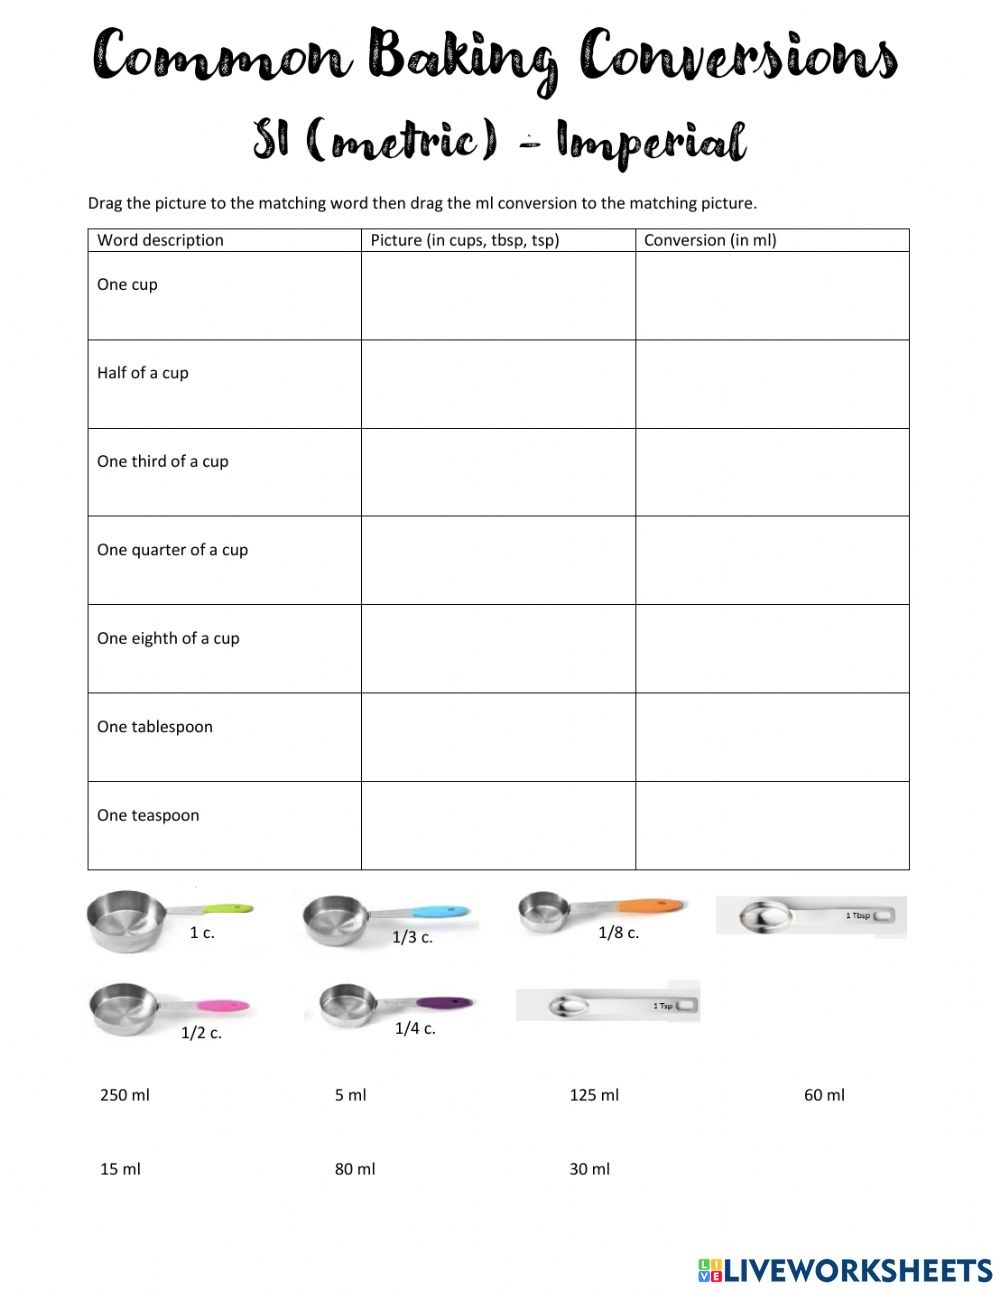 common-baking-measurements-and-conversions-worksheet-math-worksheet-answers